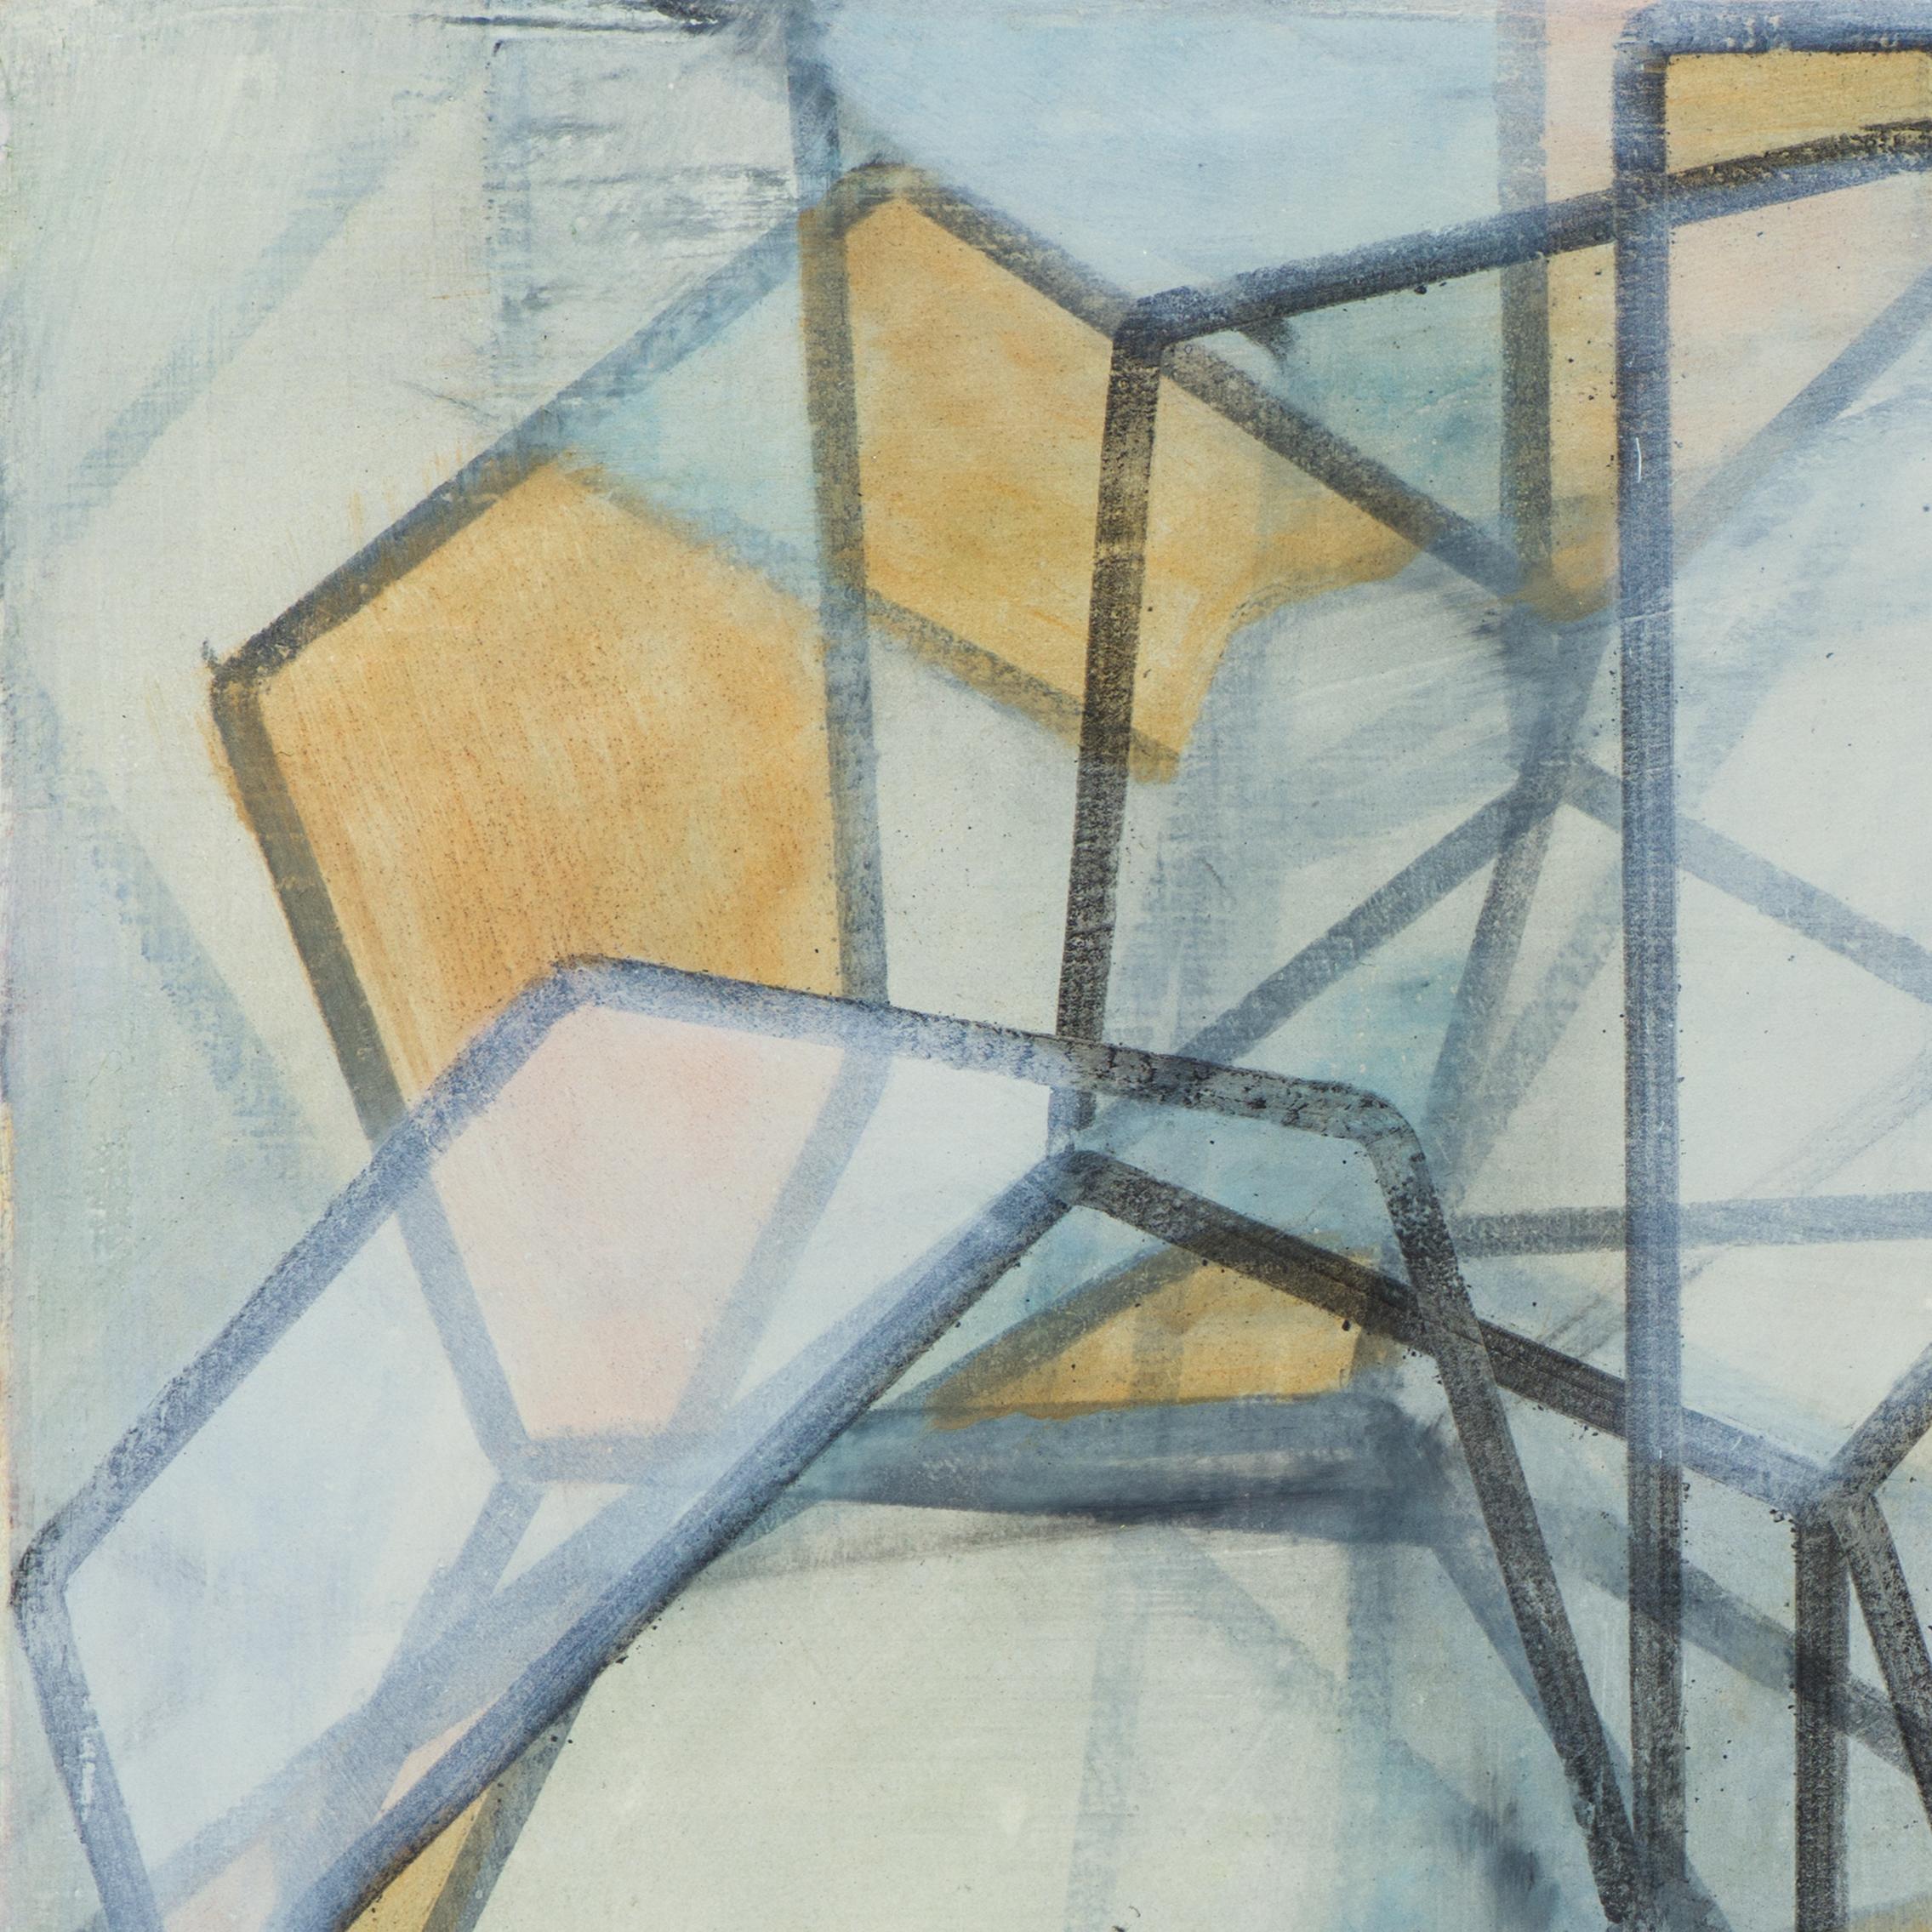 CB Study - Abstract Geometric Painting by Mark Pomilio